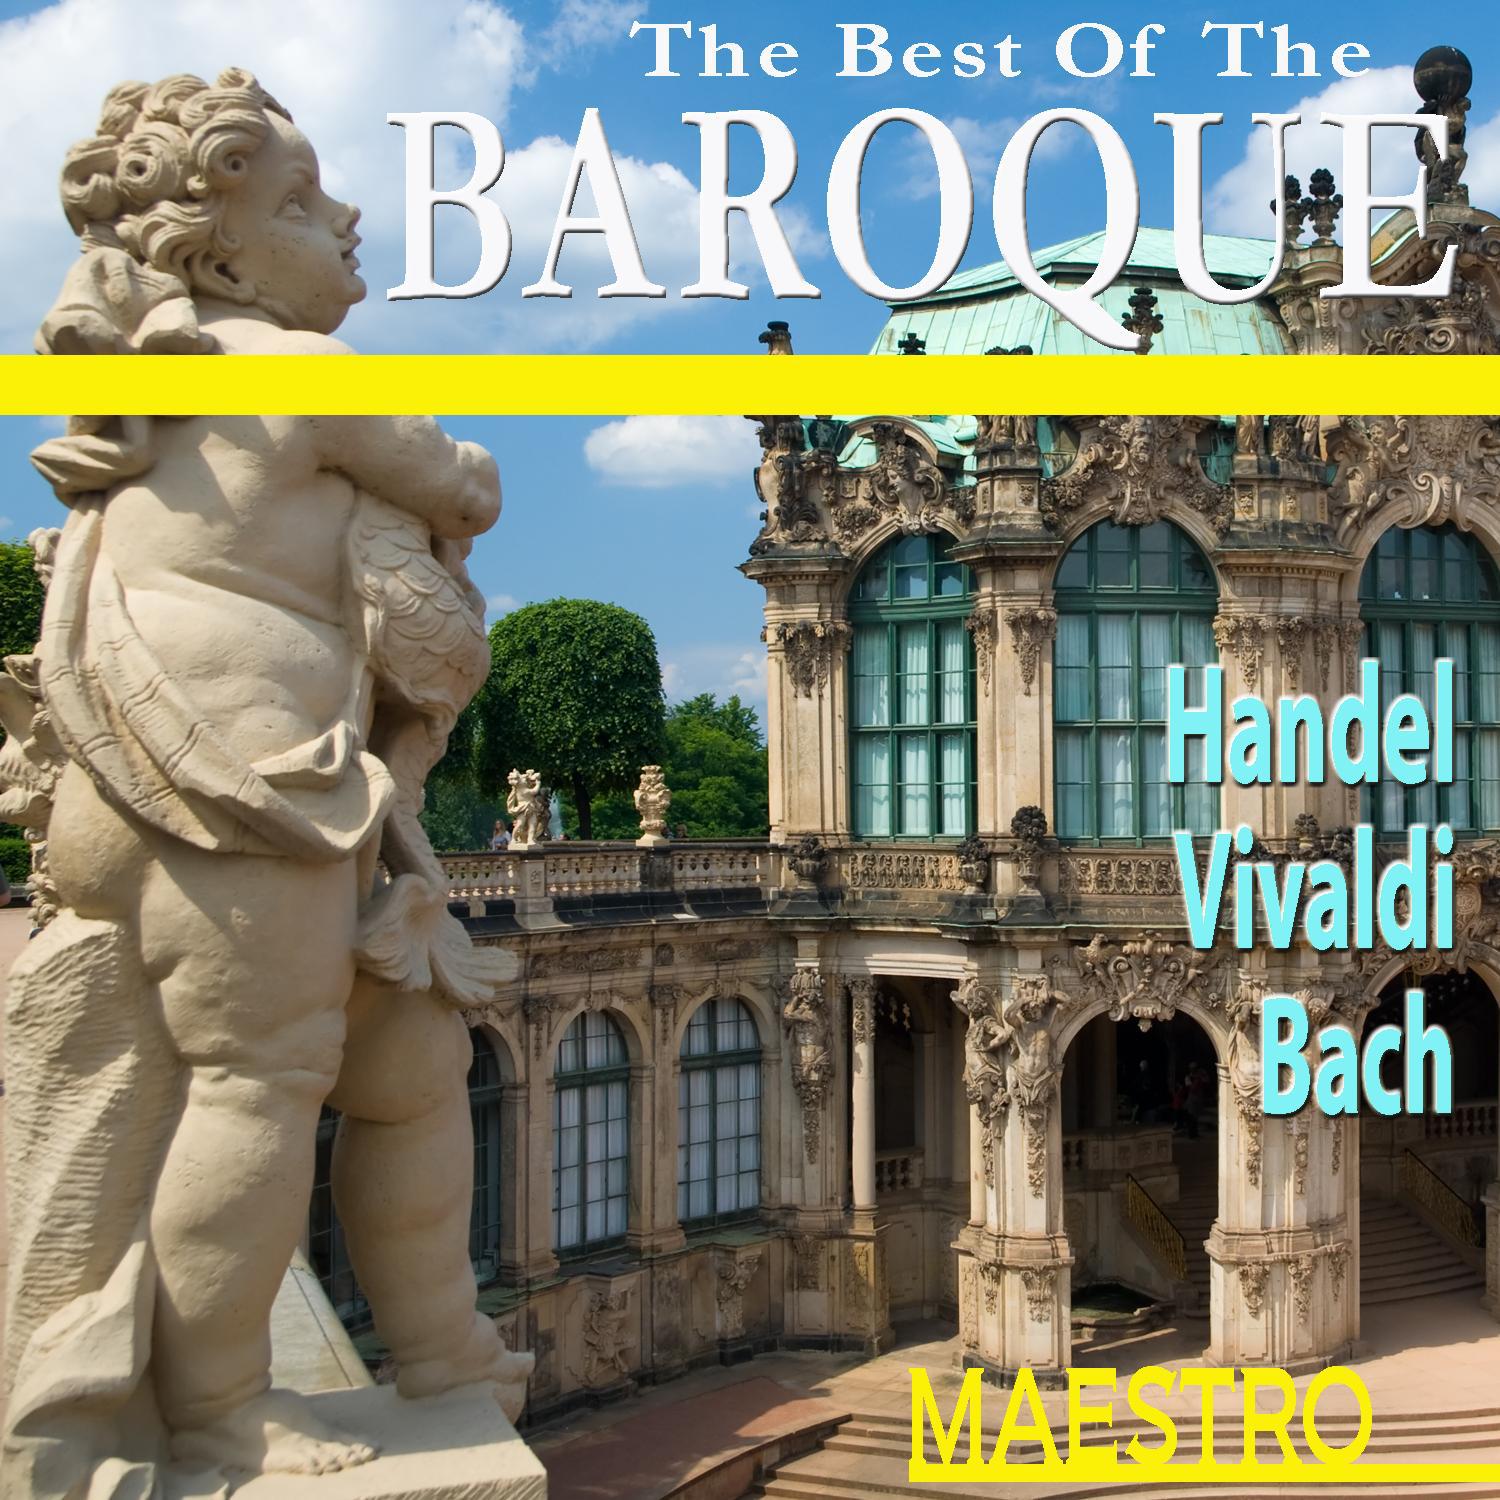 The Best of The Baroque